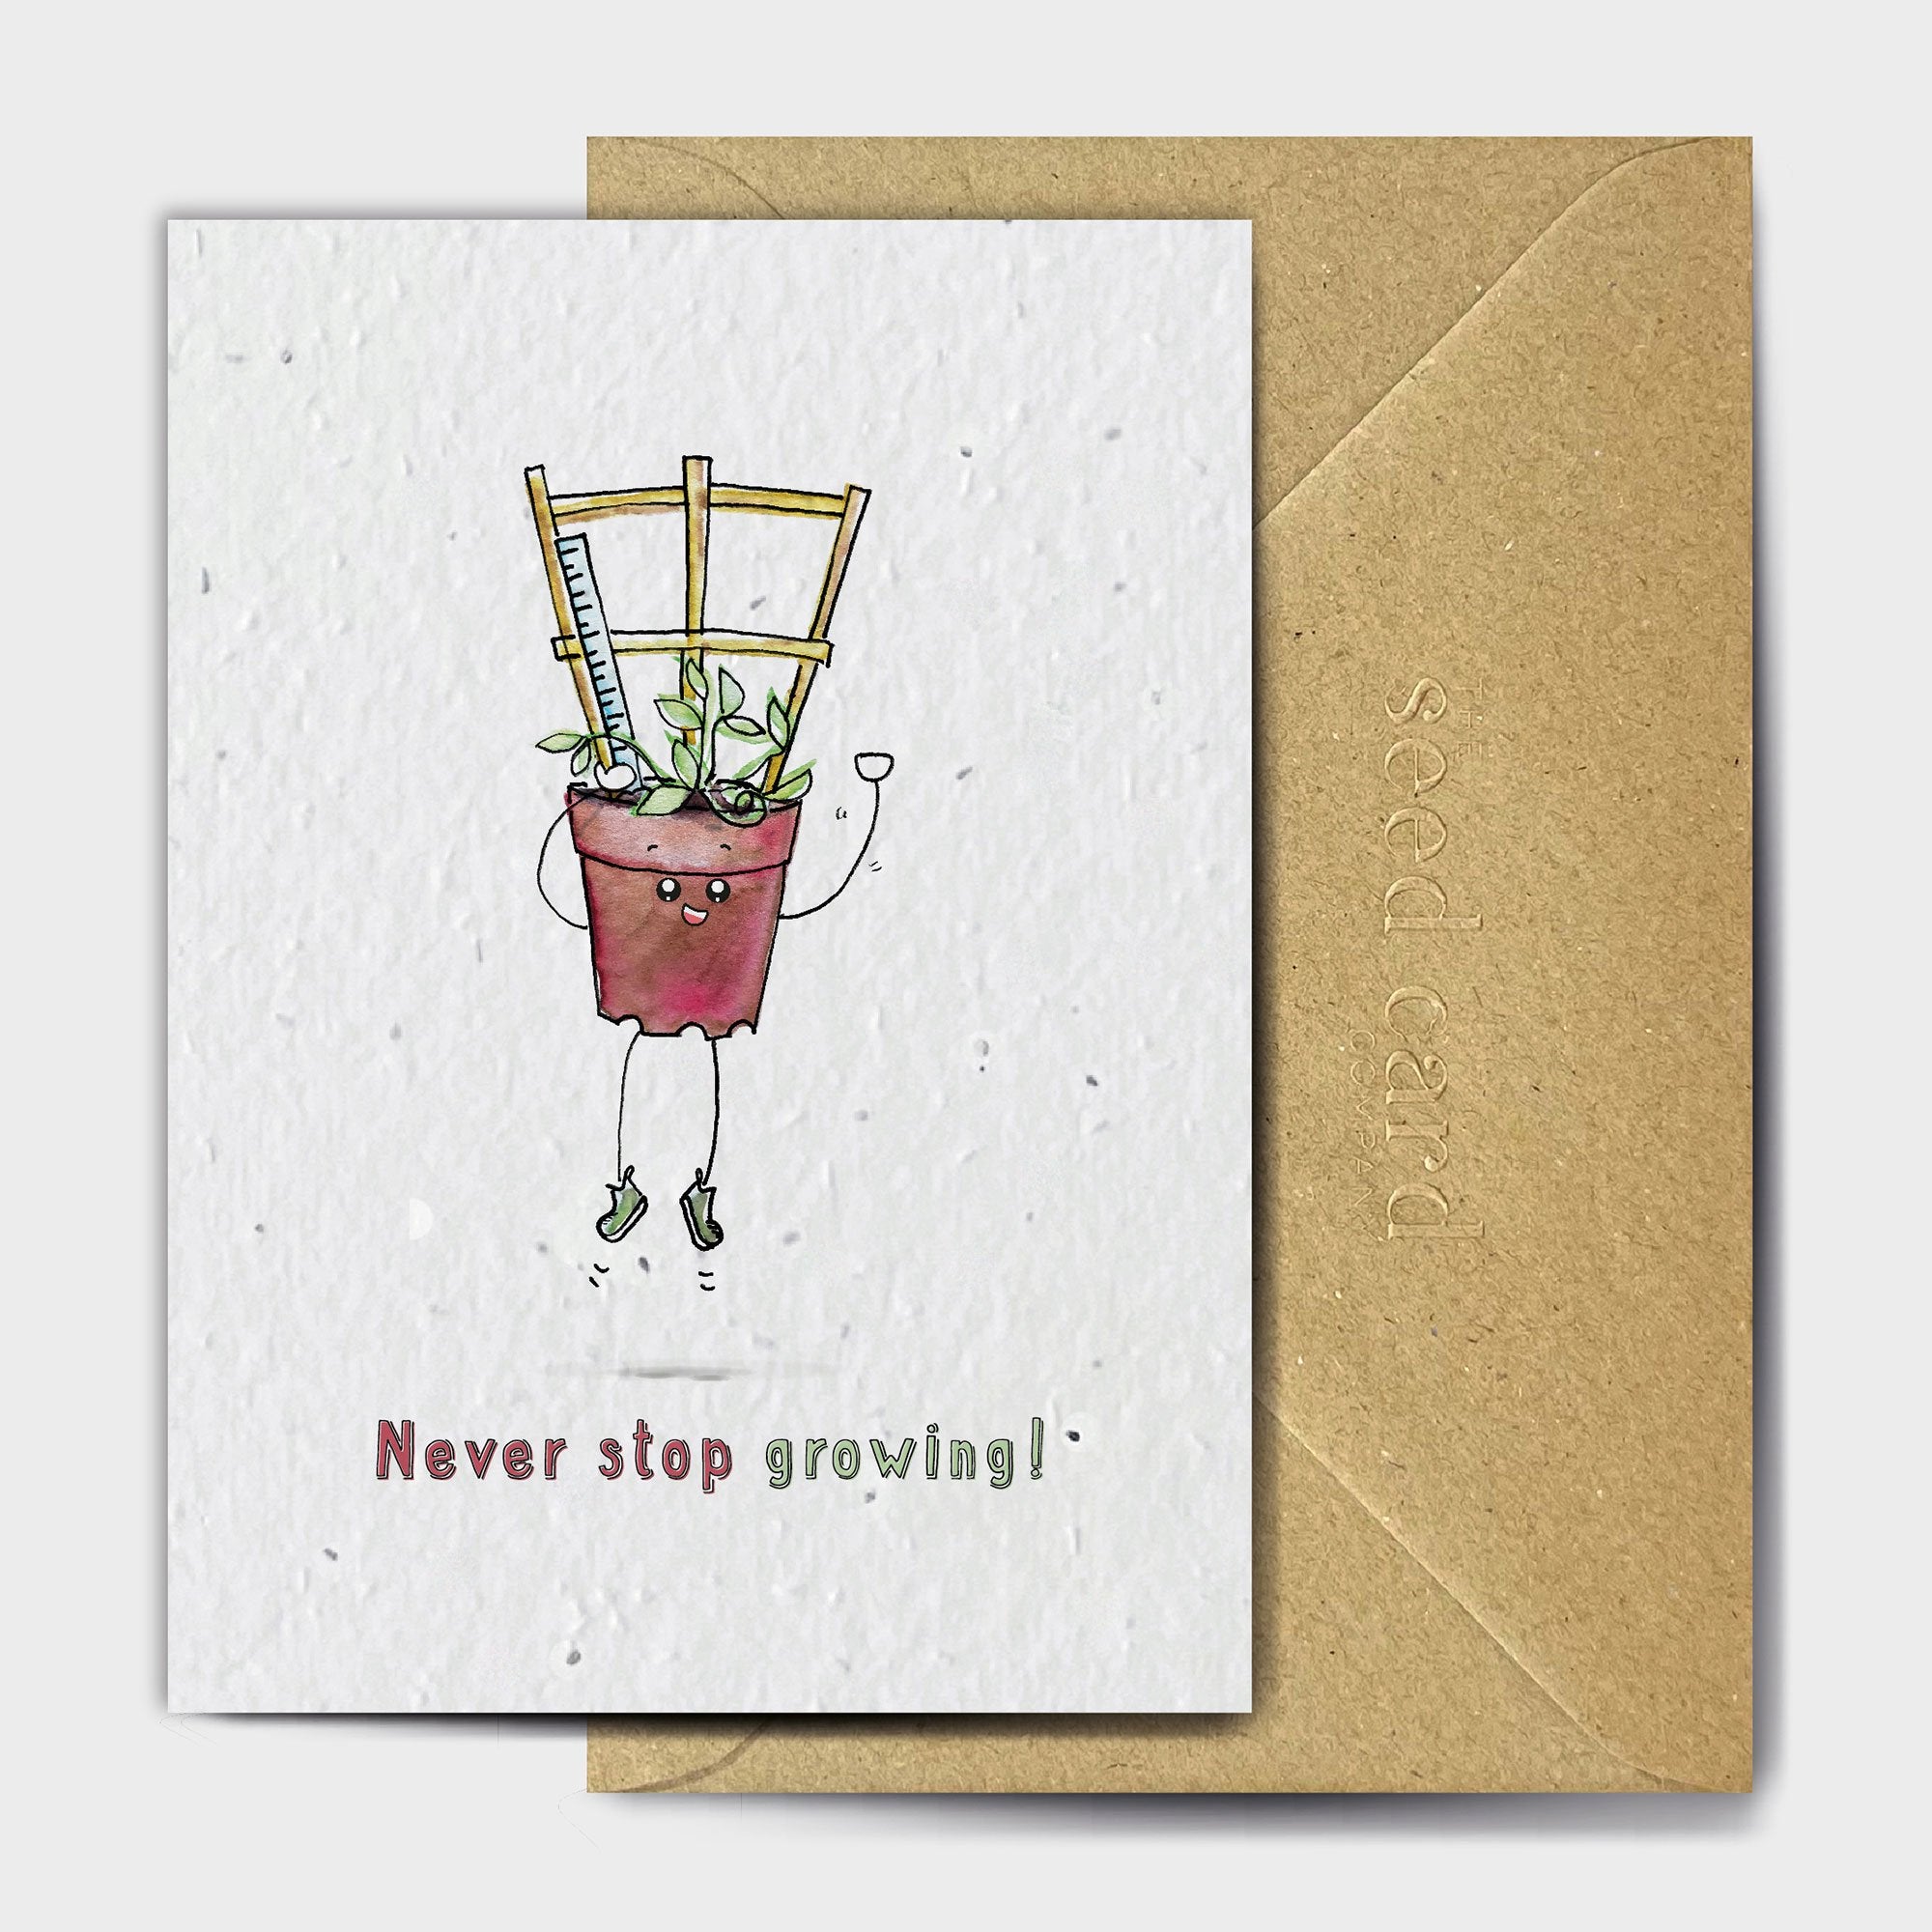 Shop online New Heights - 100% biodegradable seed-embedded cards Shop -The Seed Card Company